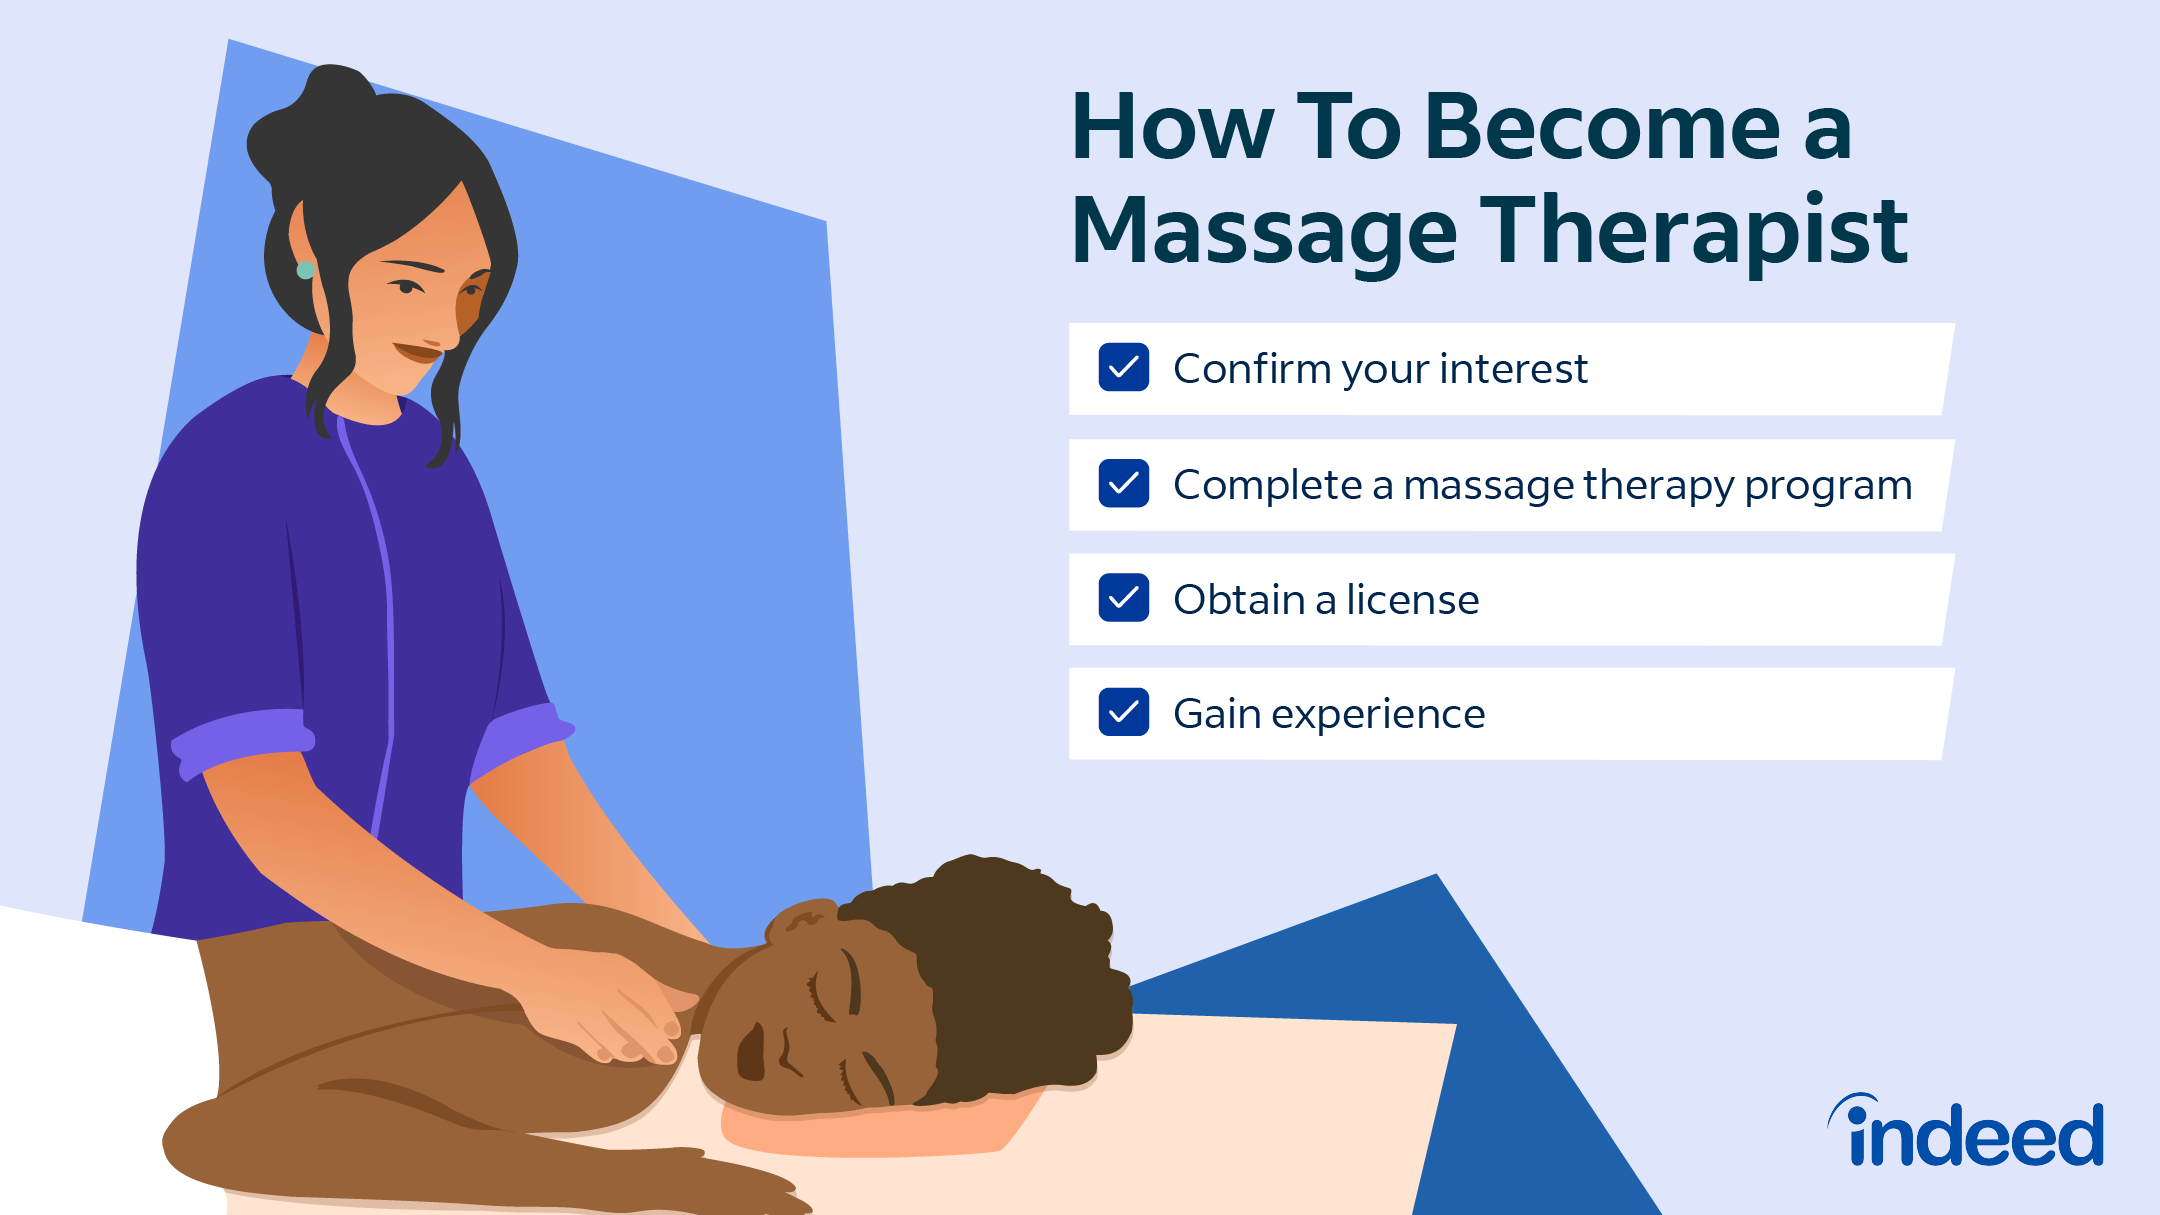 Massage Therapy Images